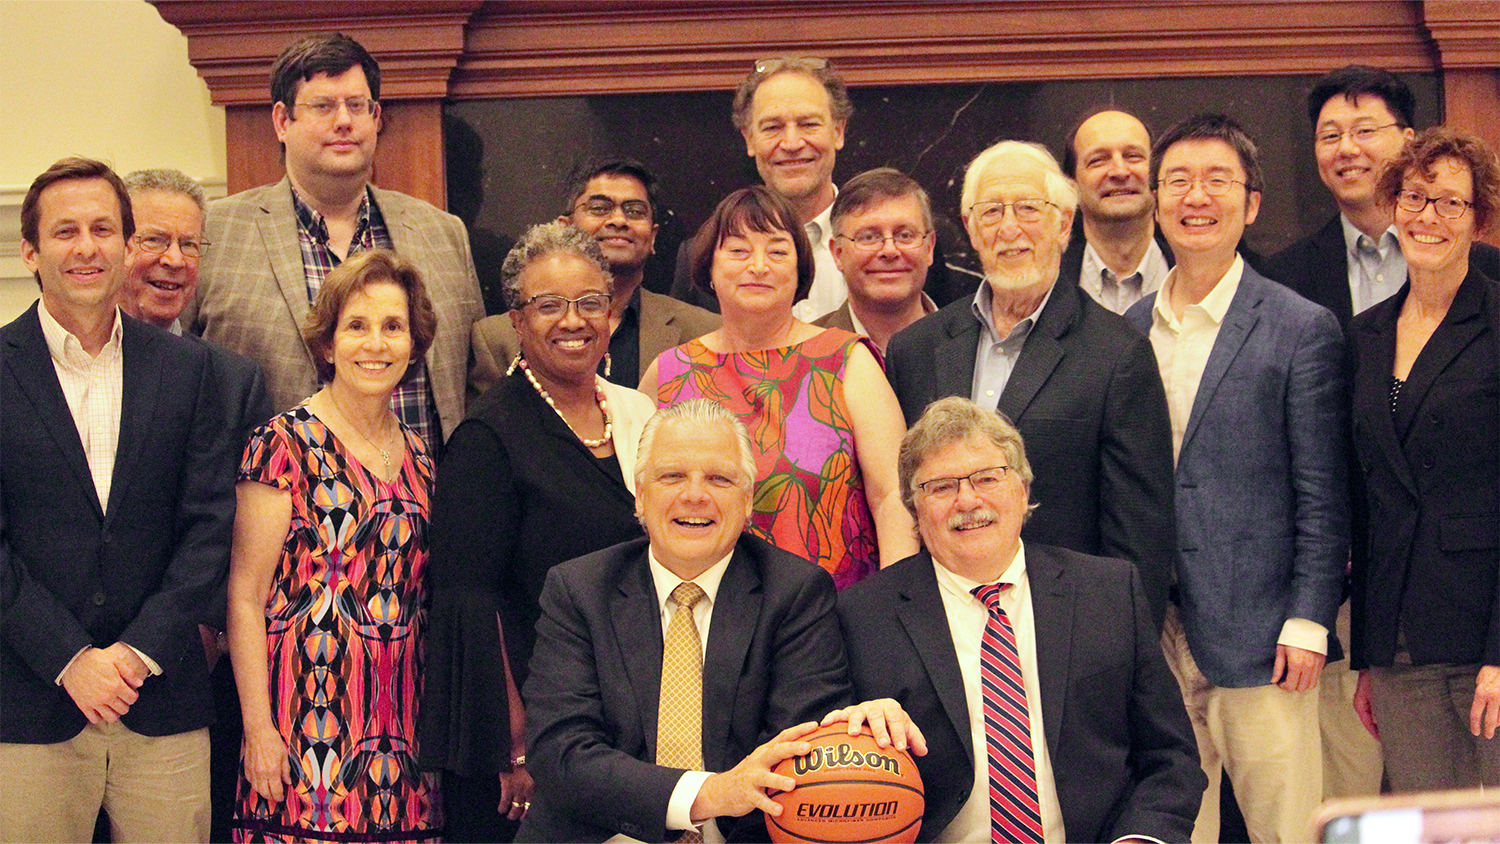 A group of faculty pose with Professors Peretti and Lamb while they hold a basketball.